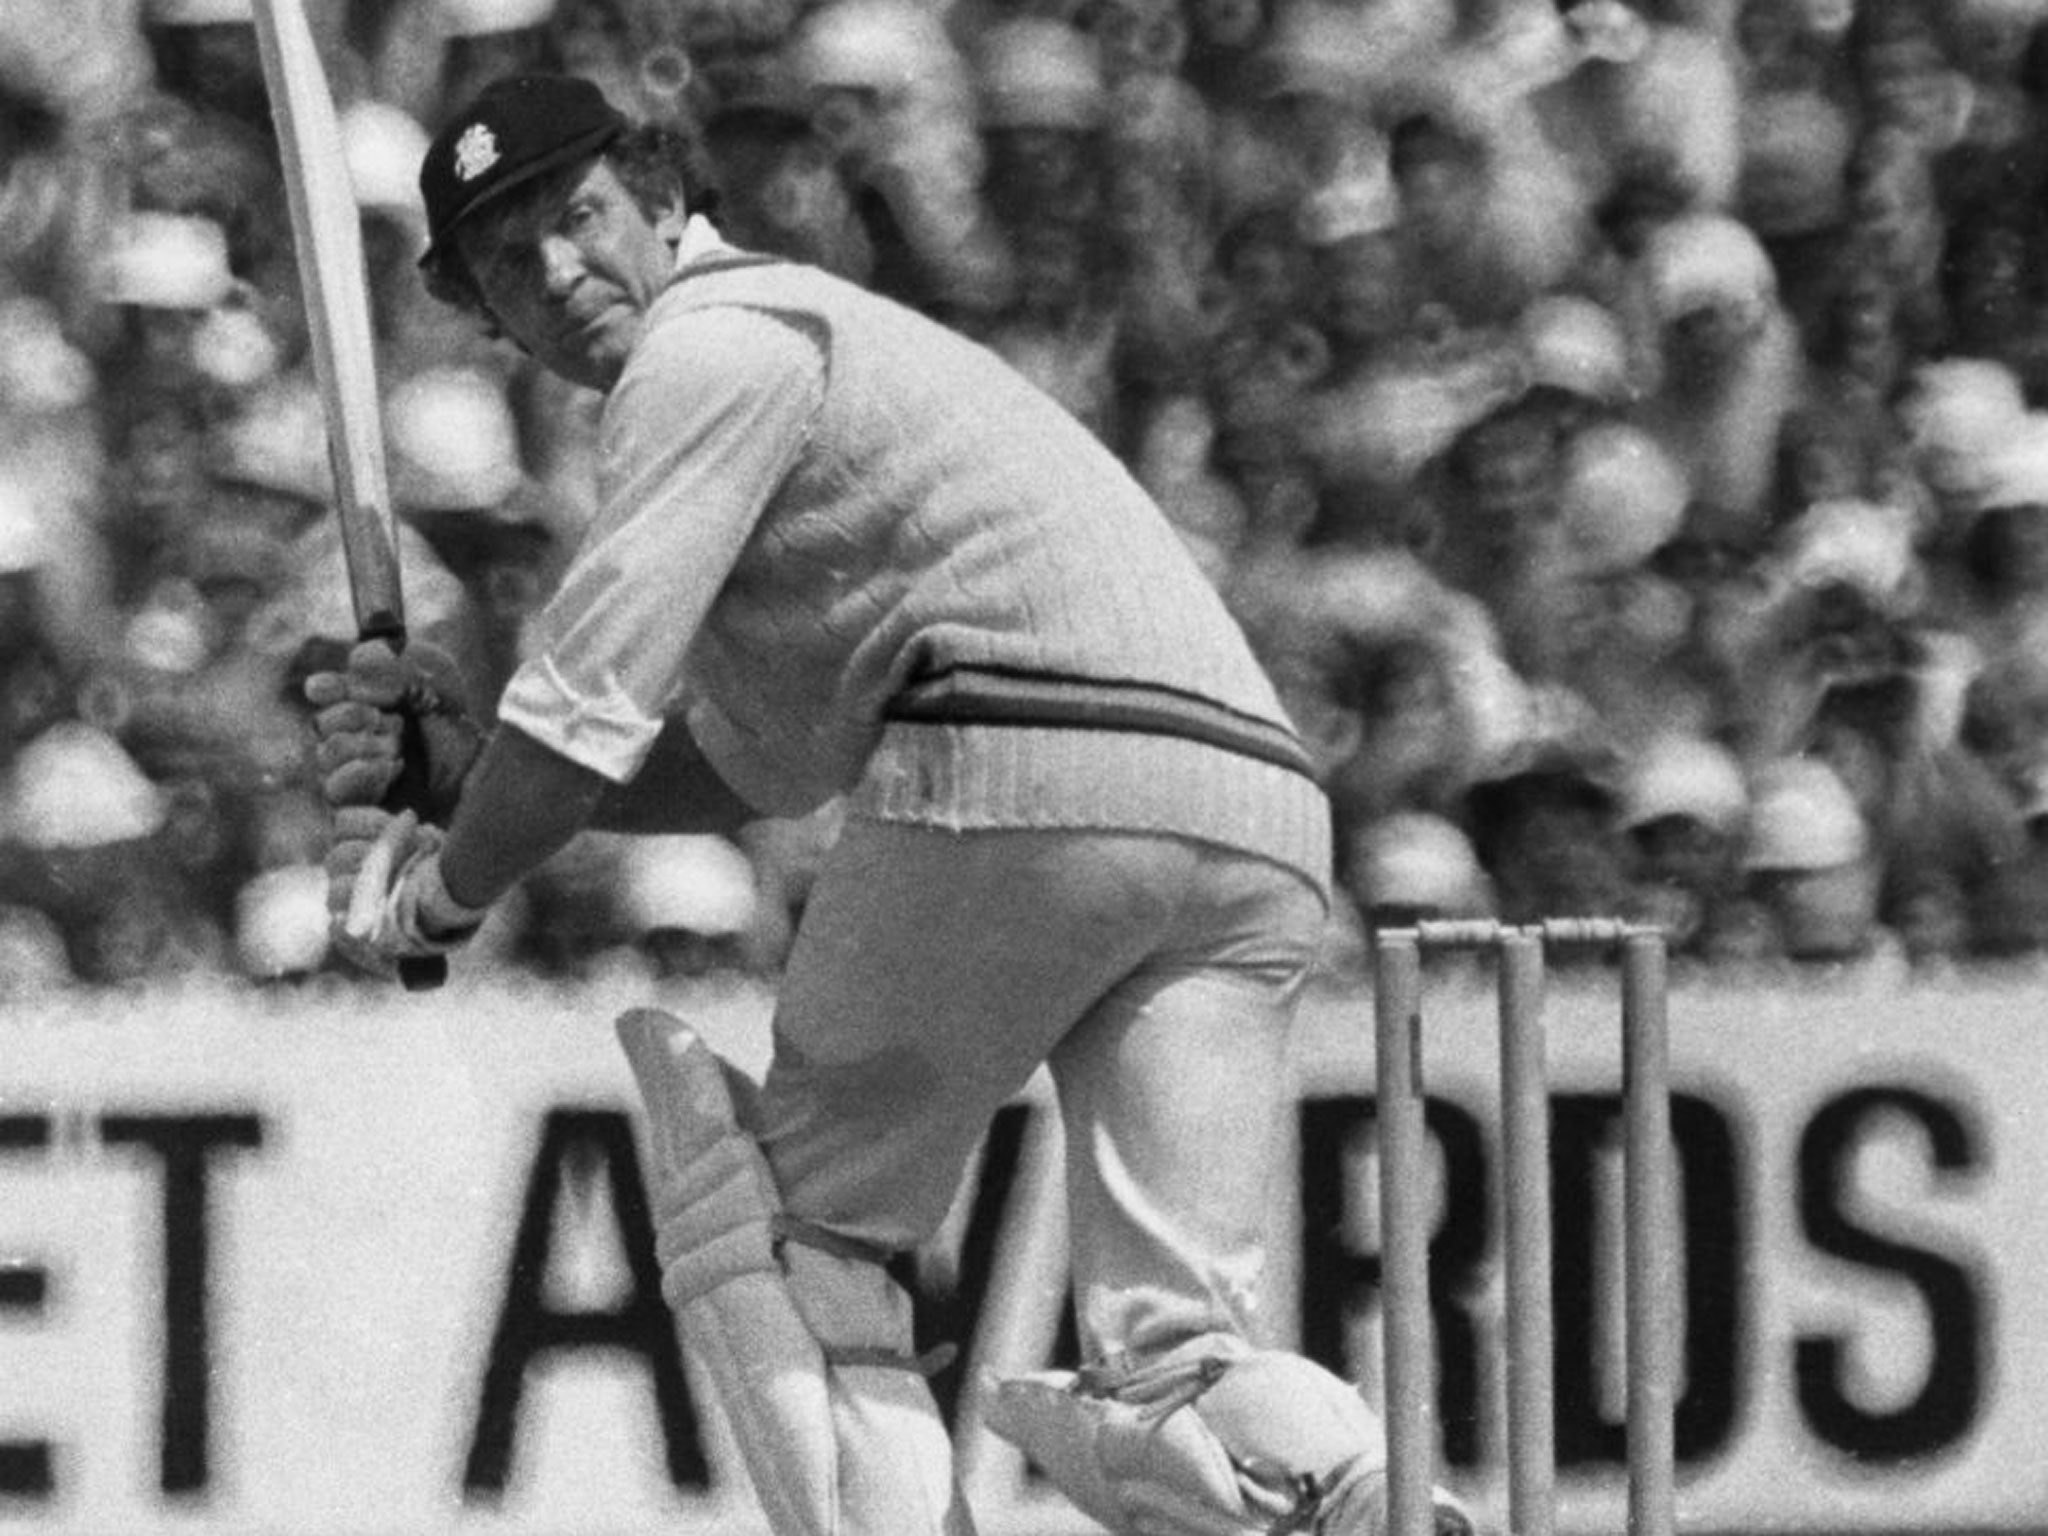 Mike Denness was arguably the best batsman born in Scotland